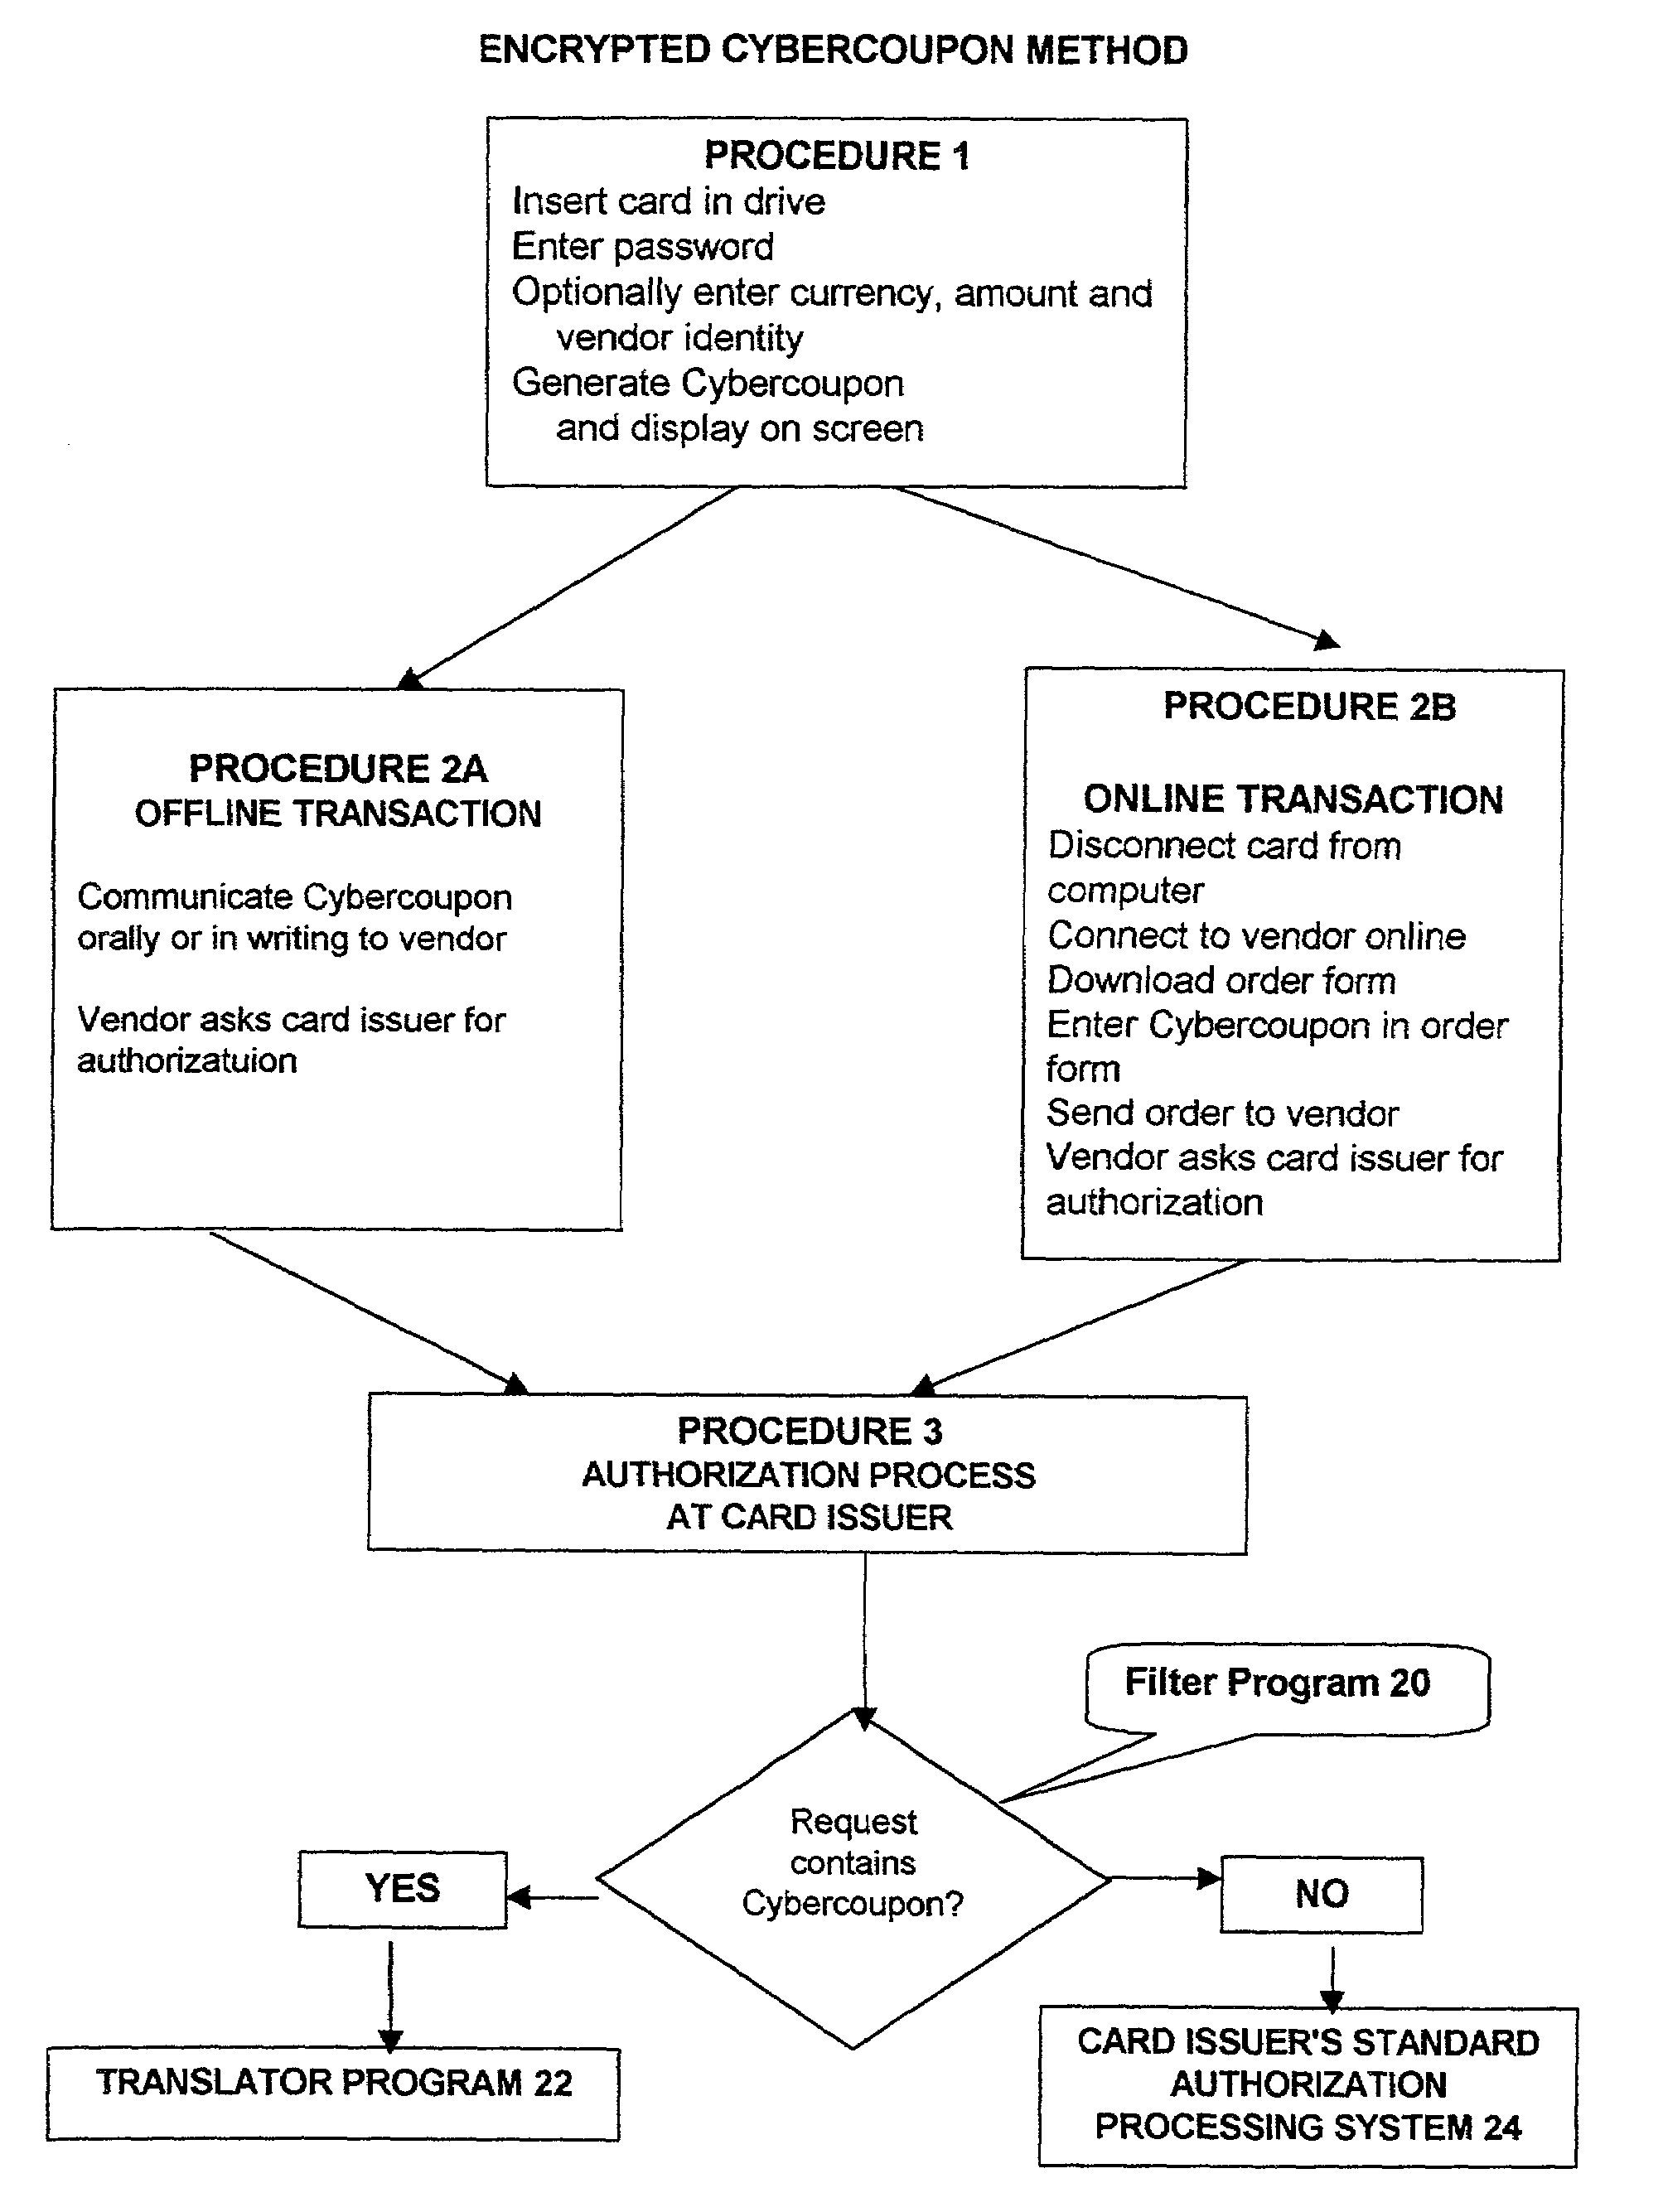 Method for preventing fraudulent use of credit cards and credit card information, and for preventing unauthorized access to restricted physical and virtual sites